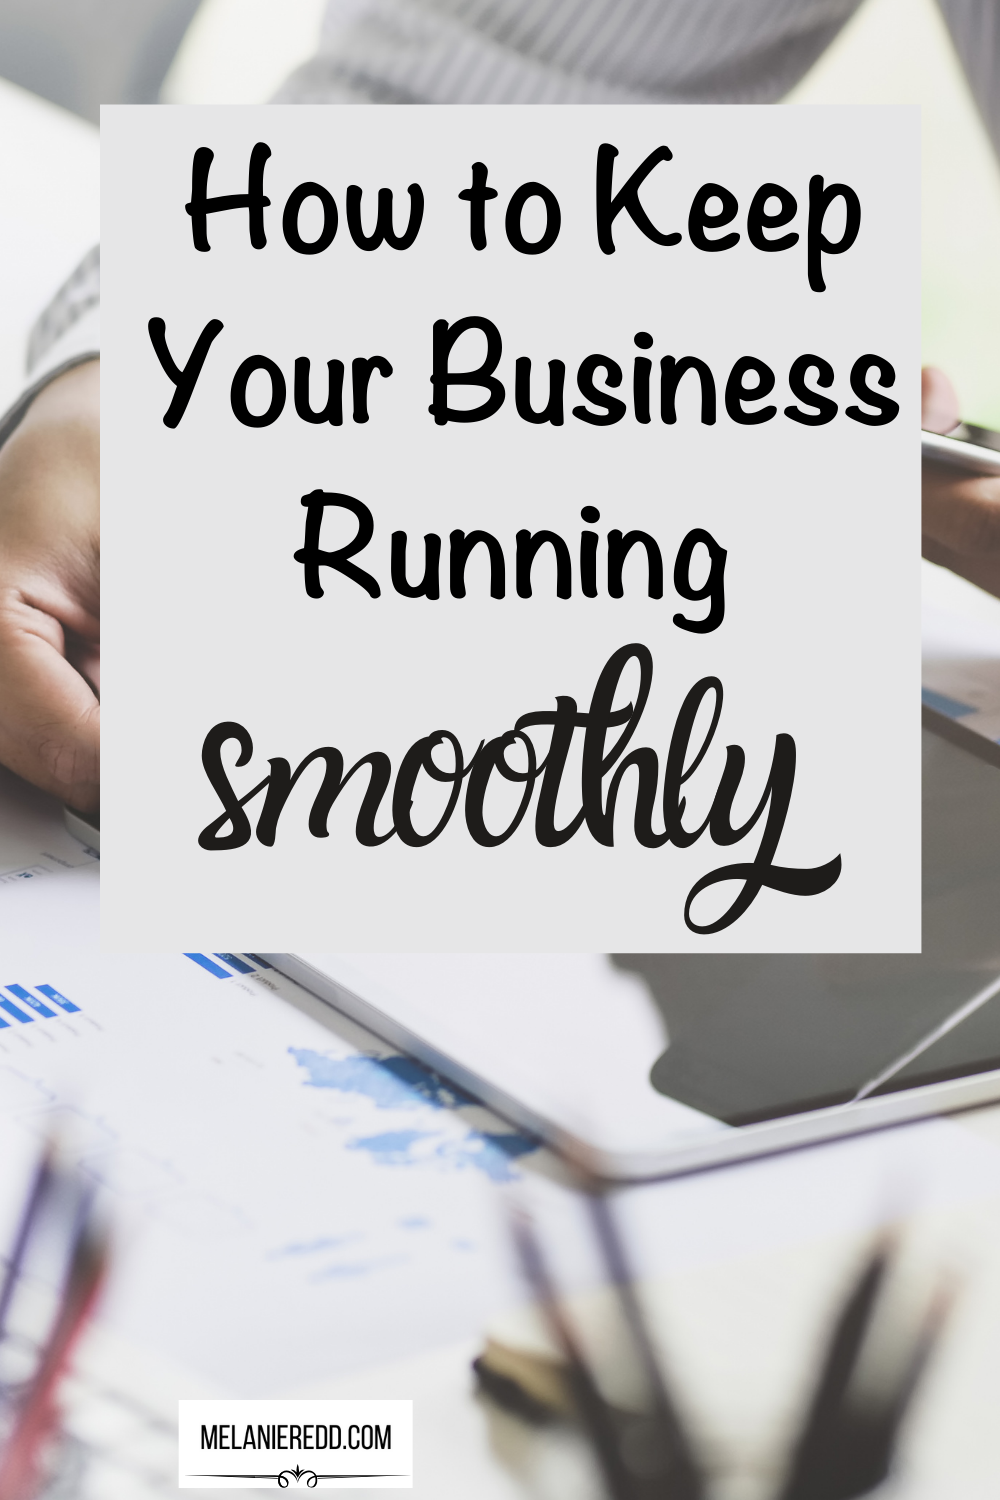 What can you do to maximize your time & keep things running more efficiently at work? Here is how to keep your business running smoothly.